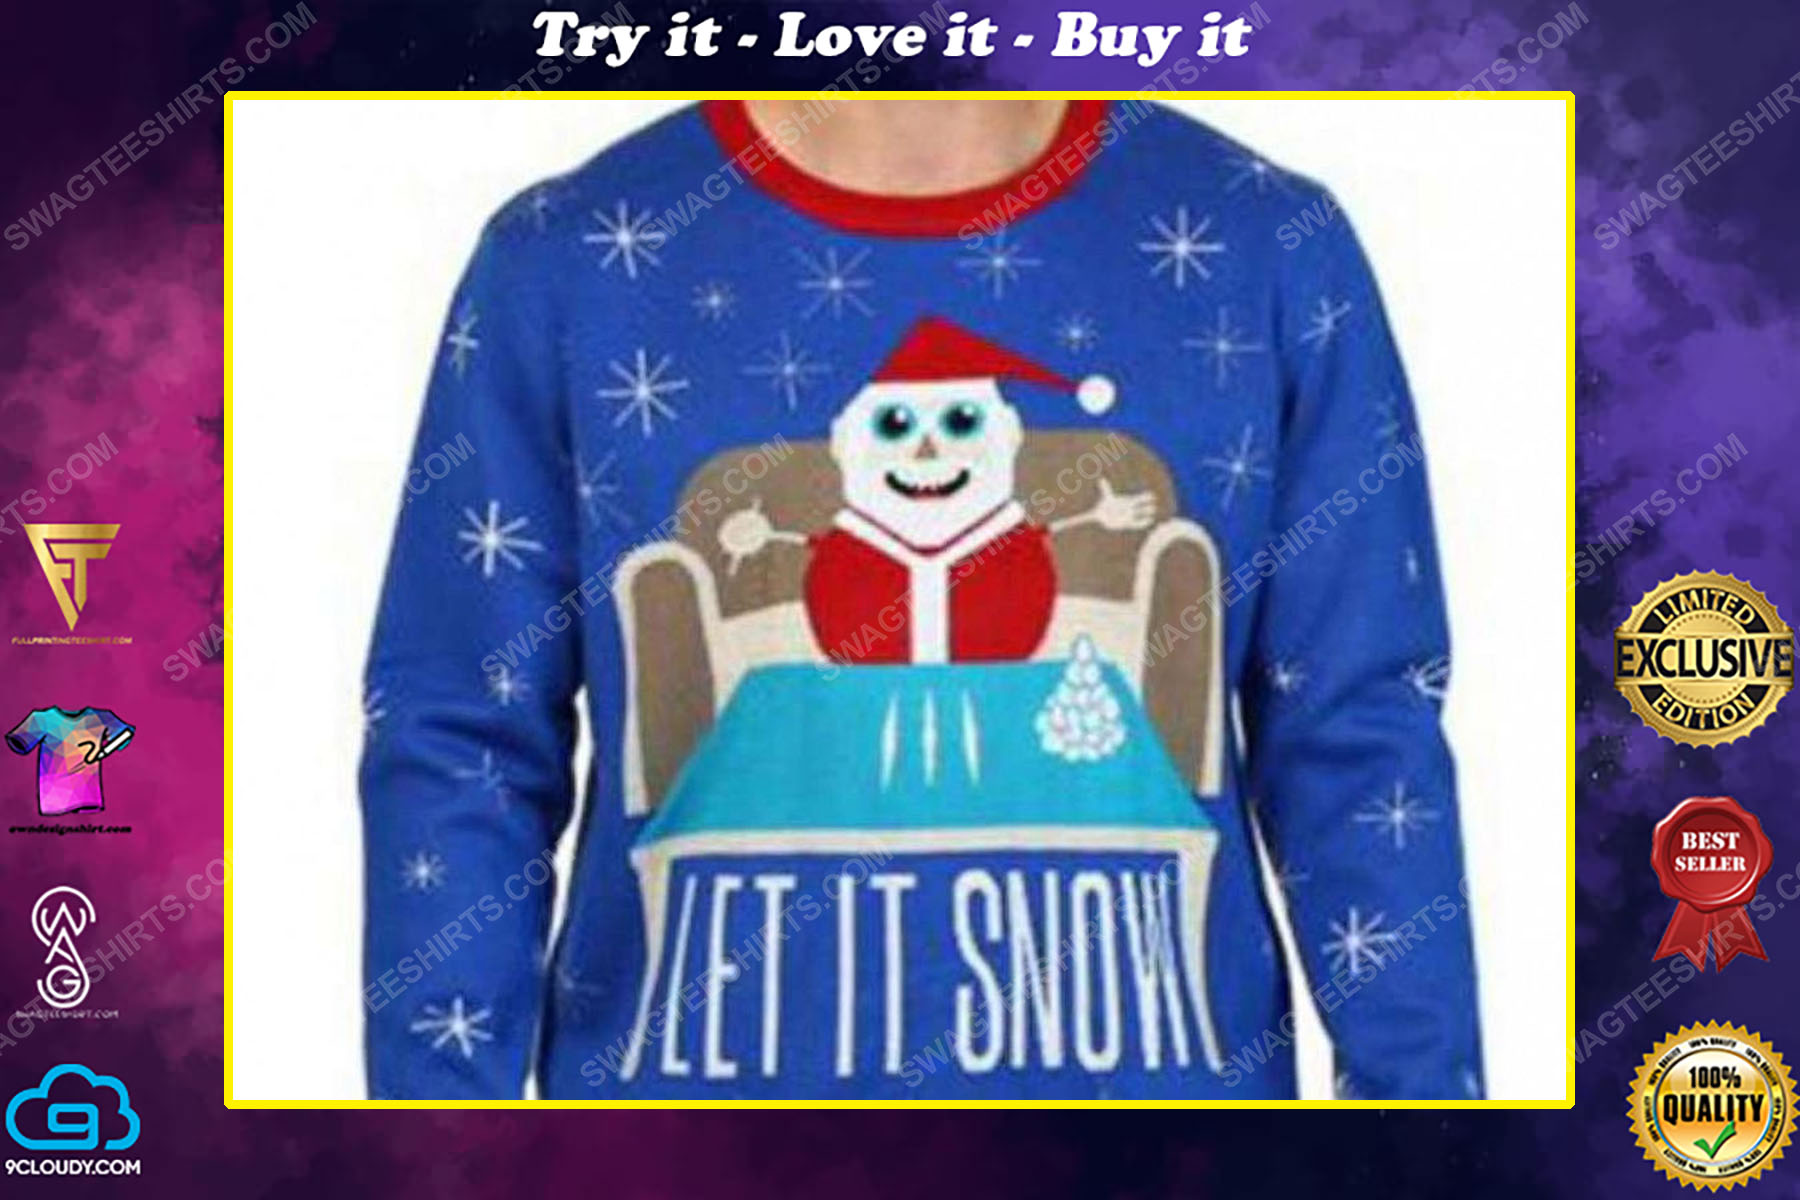 Christmas party let it snow cocaine full print ugly christmas sweater